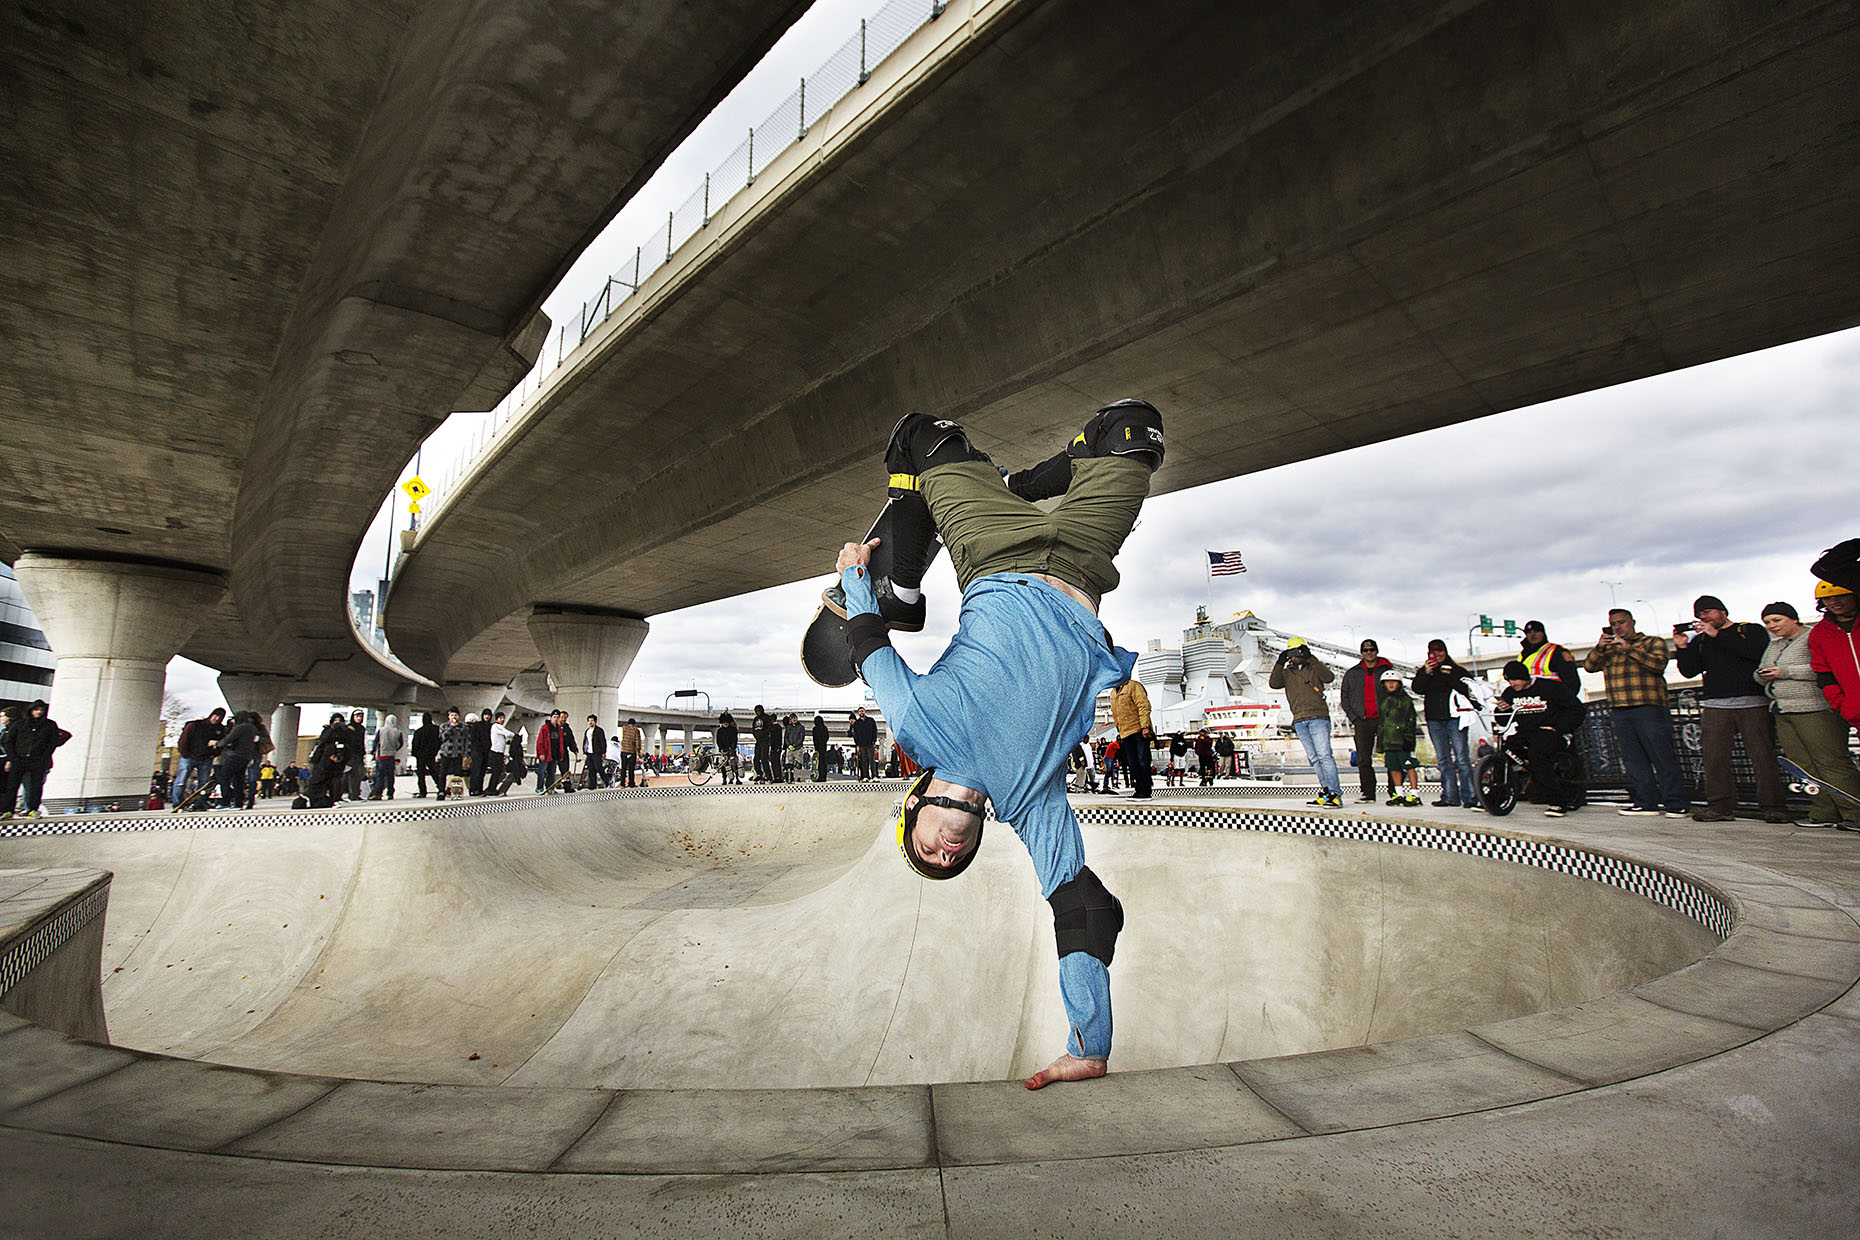 Andy Macdonald skateboarding the Lynch Family Skatepark by Boston based commercial sports photographer Brian Nevins